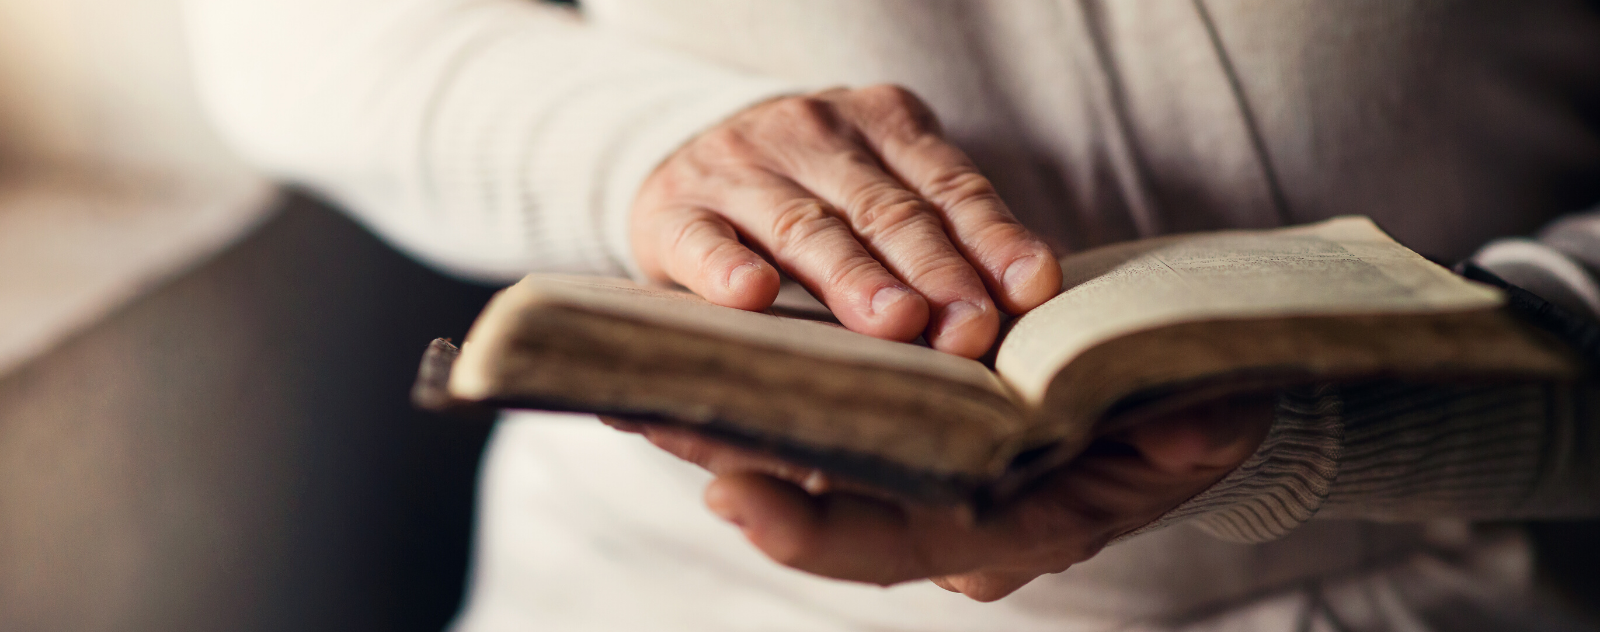 What are the most important bible verses to memorize?